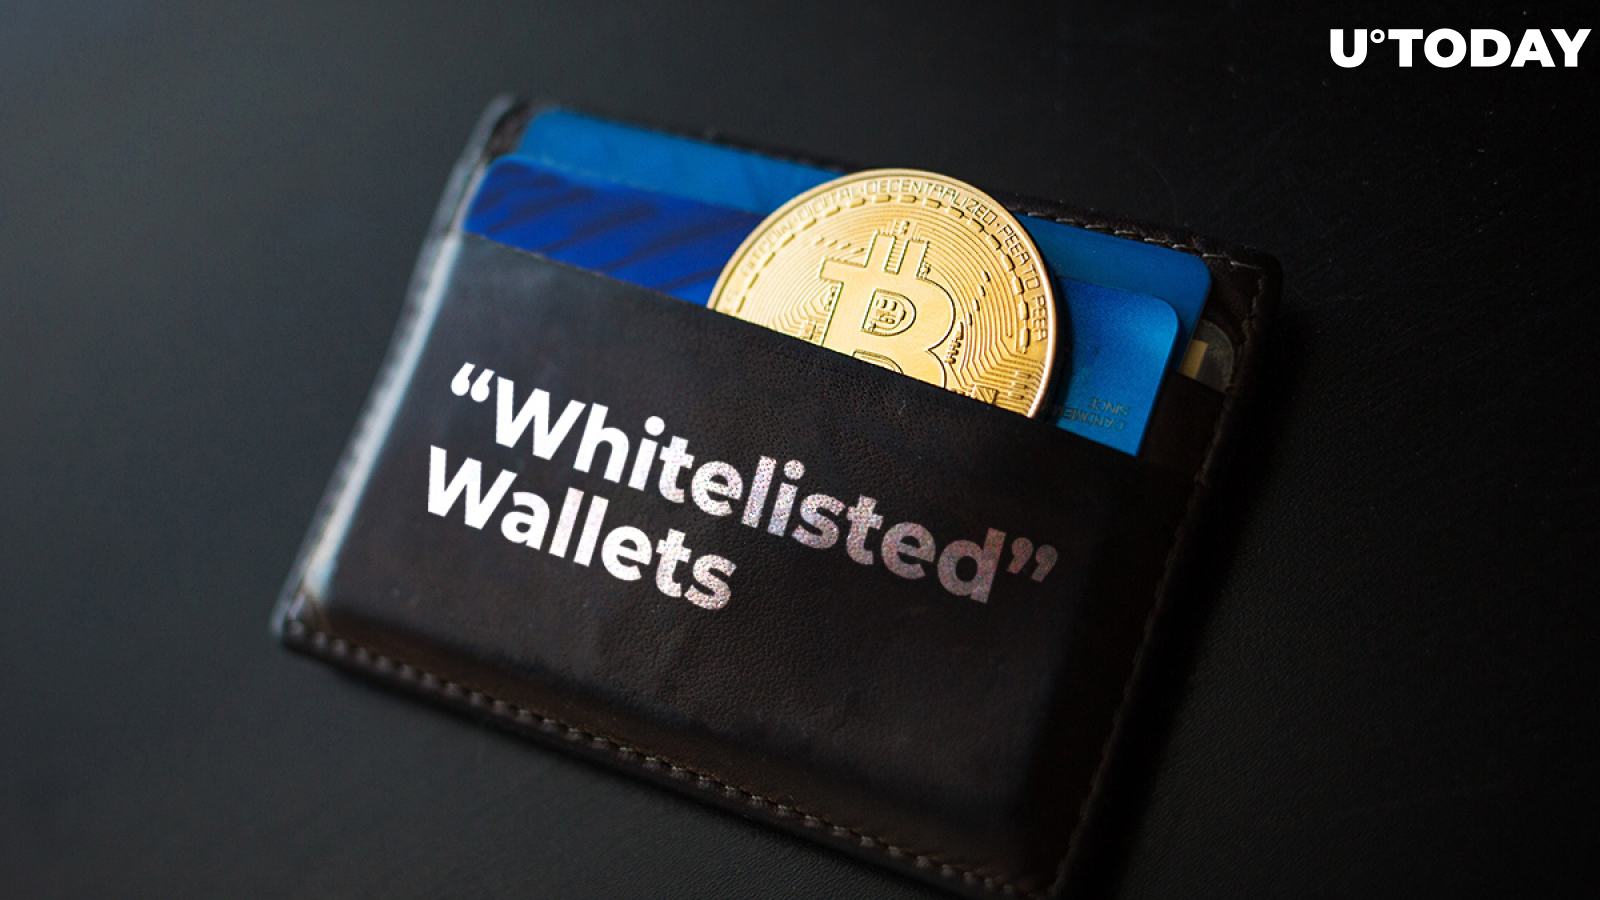 Soon Most Exchanges Will Withdraw Crypto Only to "Whitelisted" Wallets: BlockTower Capital CIO